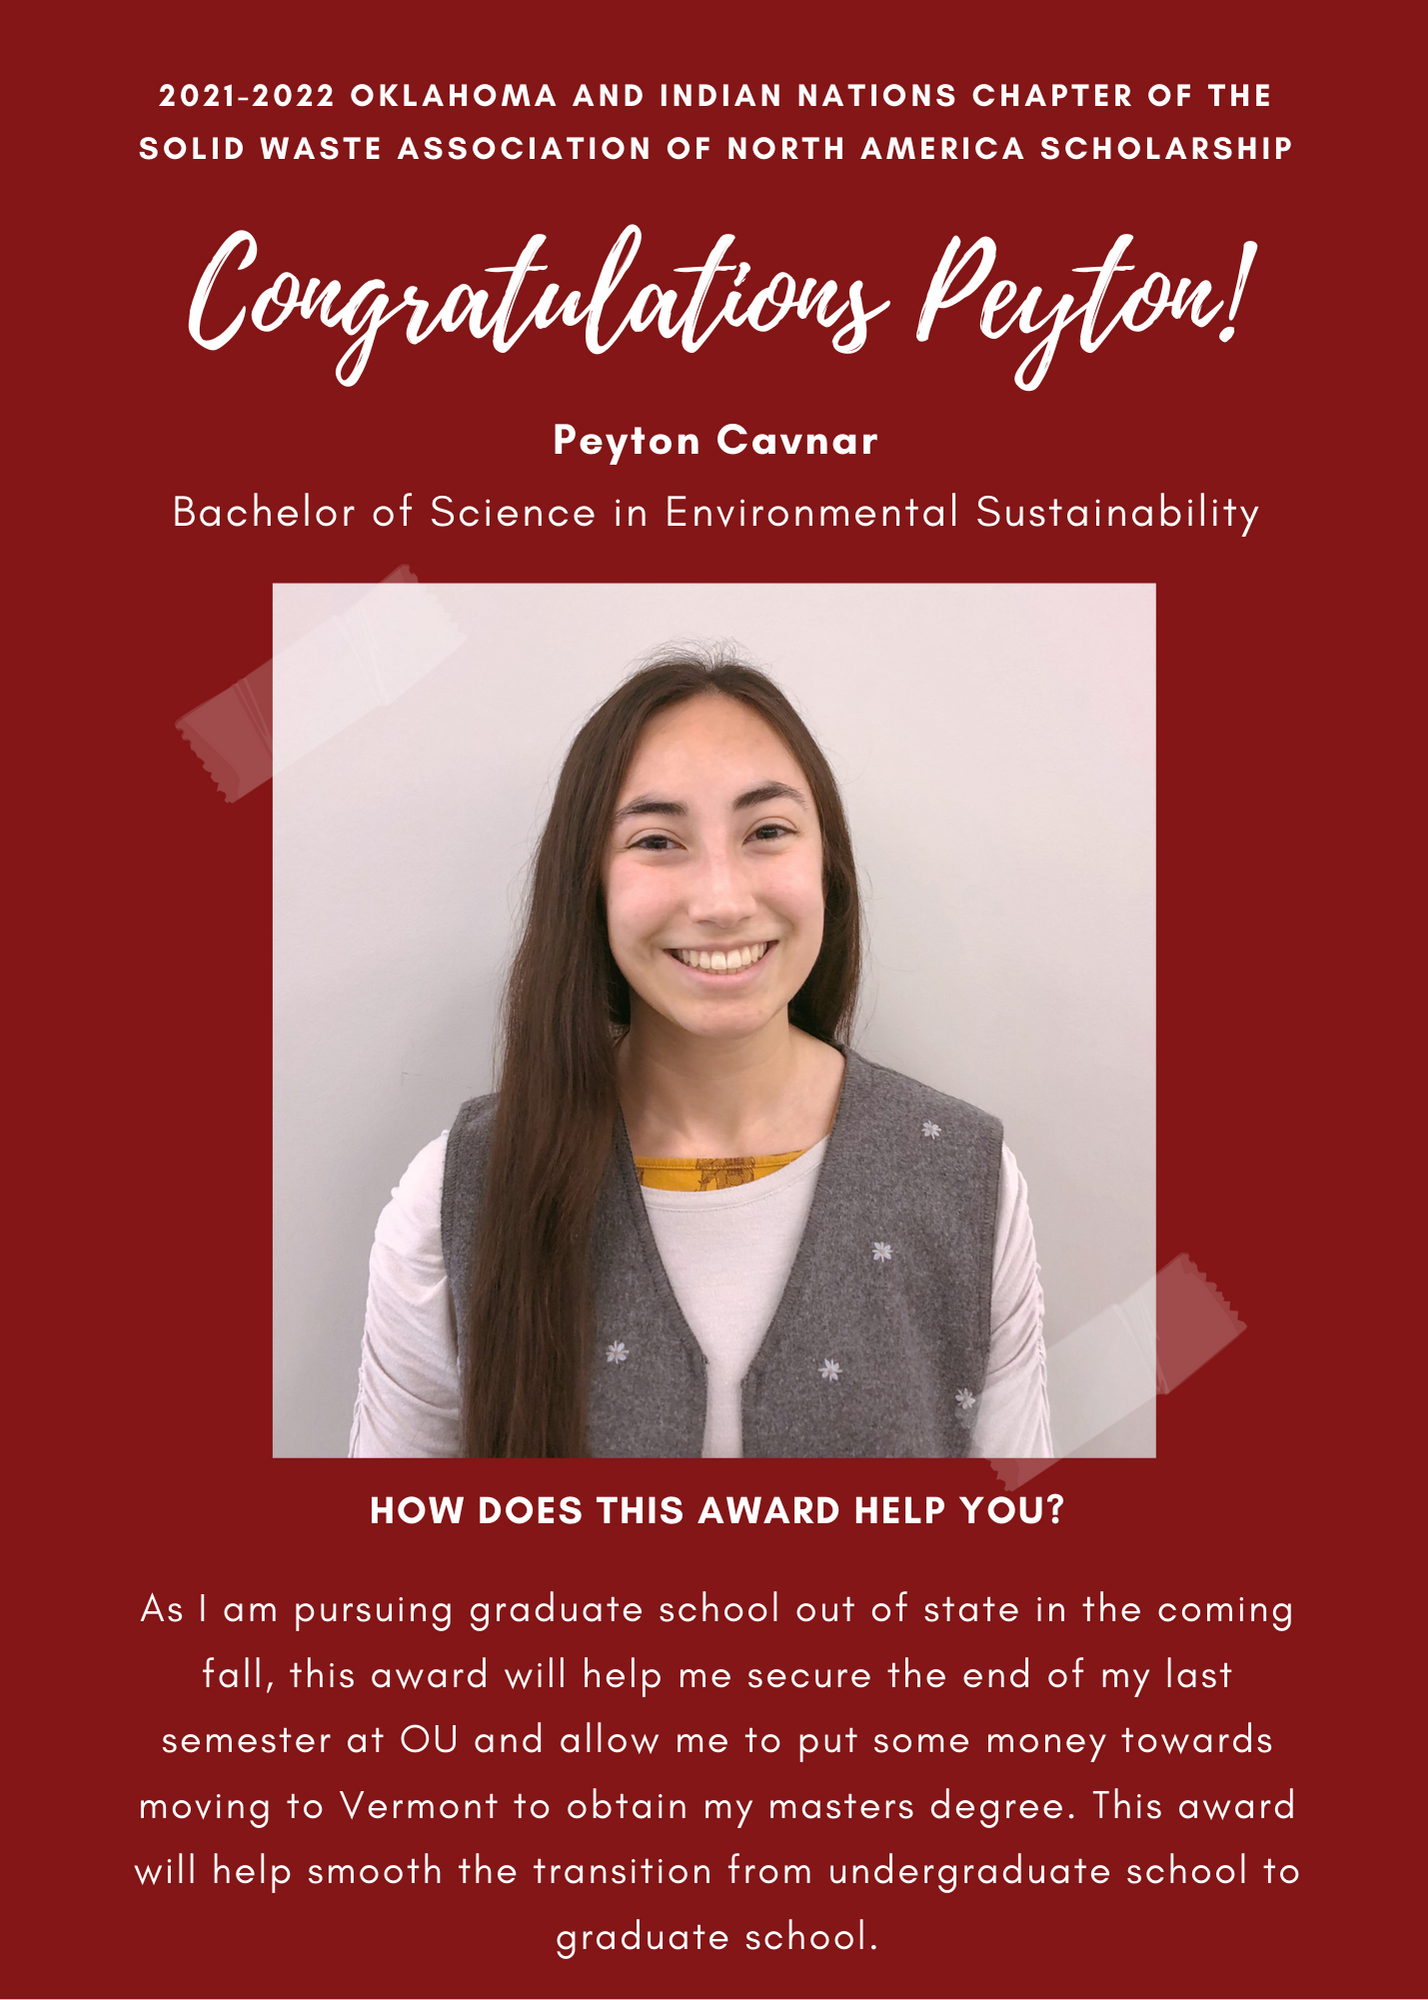 2021- 2022 Oklahoma and Indian Naations chapter of Solid Waste Association of North America Scholarship. Congratulations Peyton! Peyton Cavnar Bachelor of Science in Environmental Sustainability. How does this award help you? As I am pursuong gradiuate school out of state in the coming fall, this award will help me secure the end of my last semester at OU and allow me to put some money towards moving to Vermont to obtain my Master's Degree. This award will help smooth the transiton from undergraduate school to graduate school.